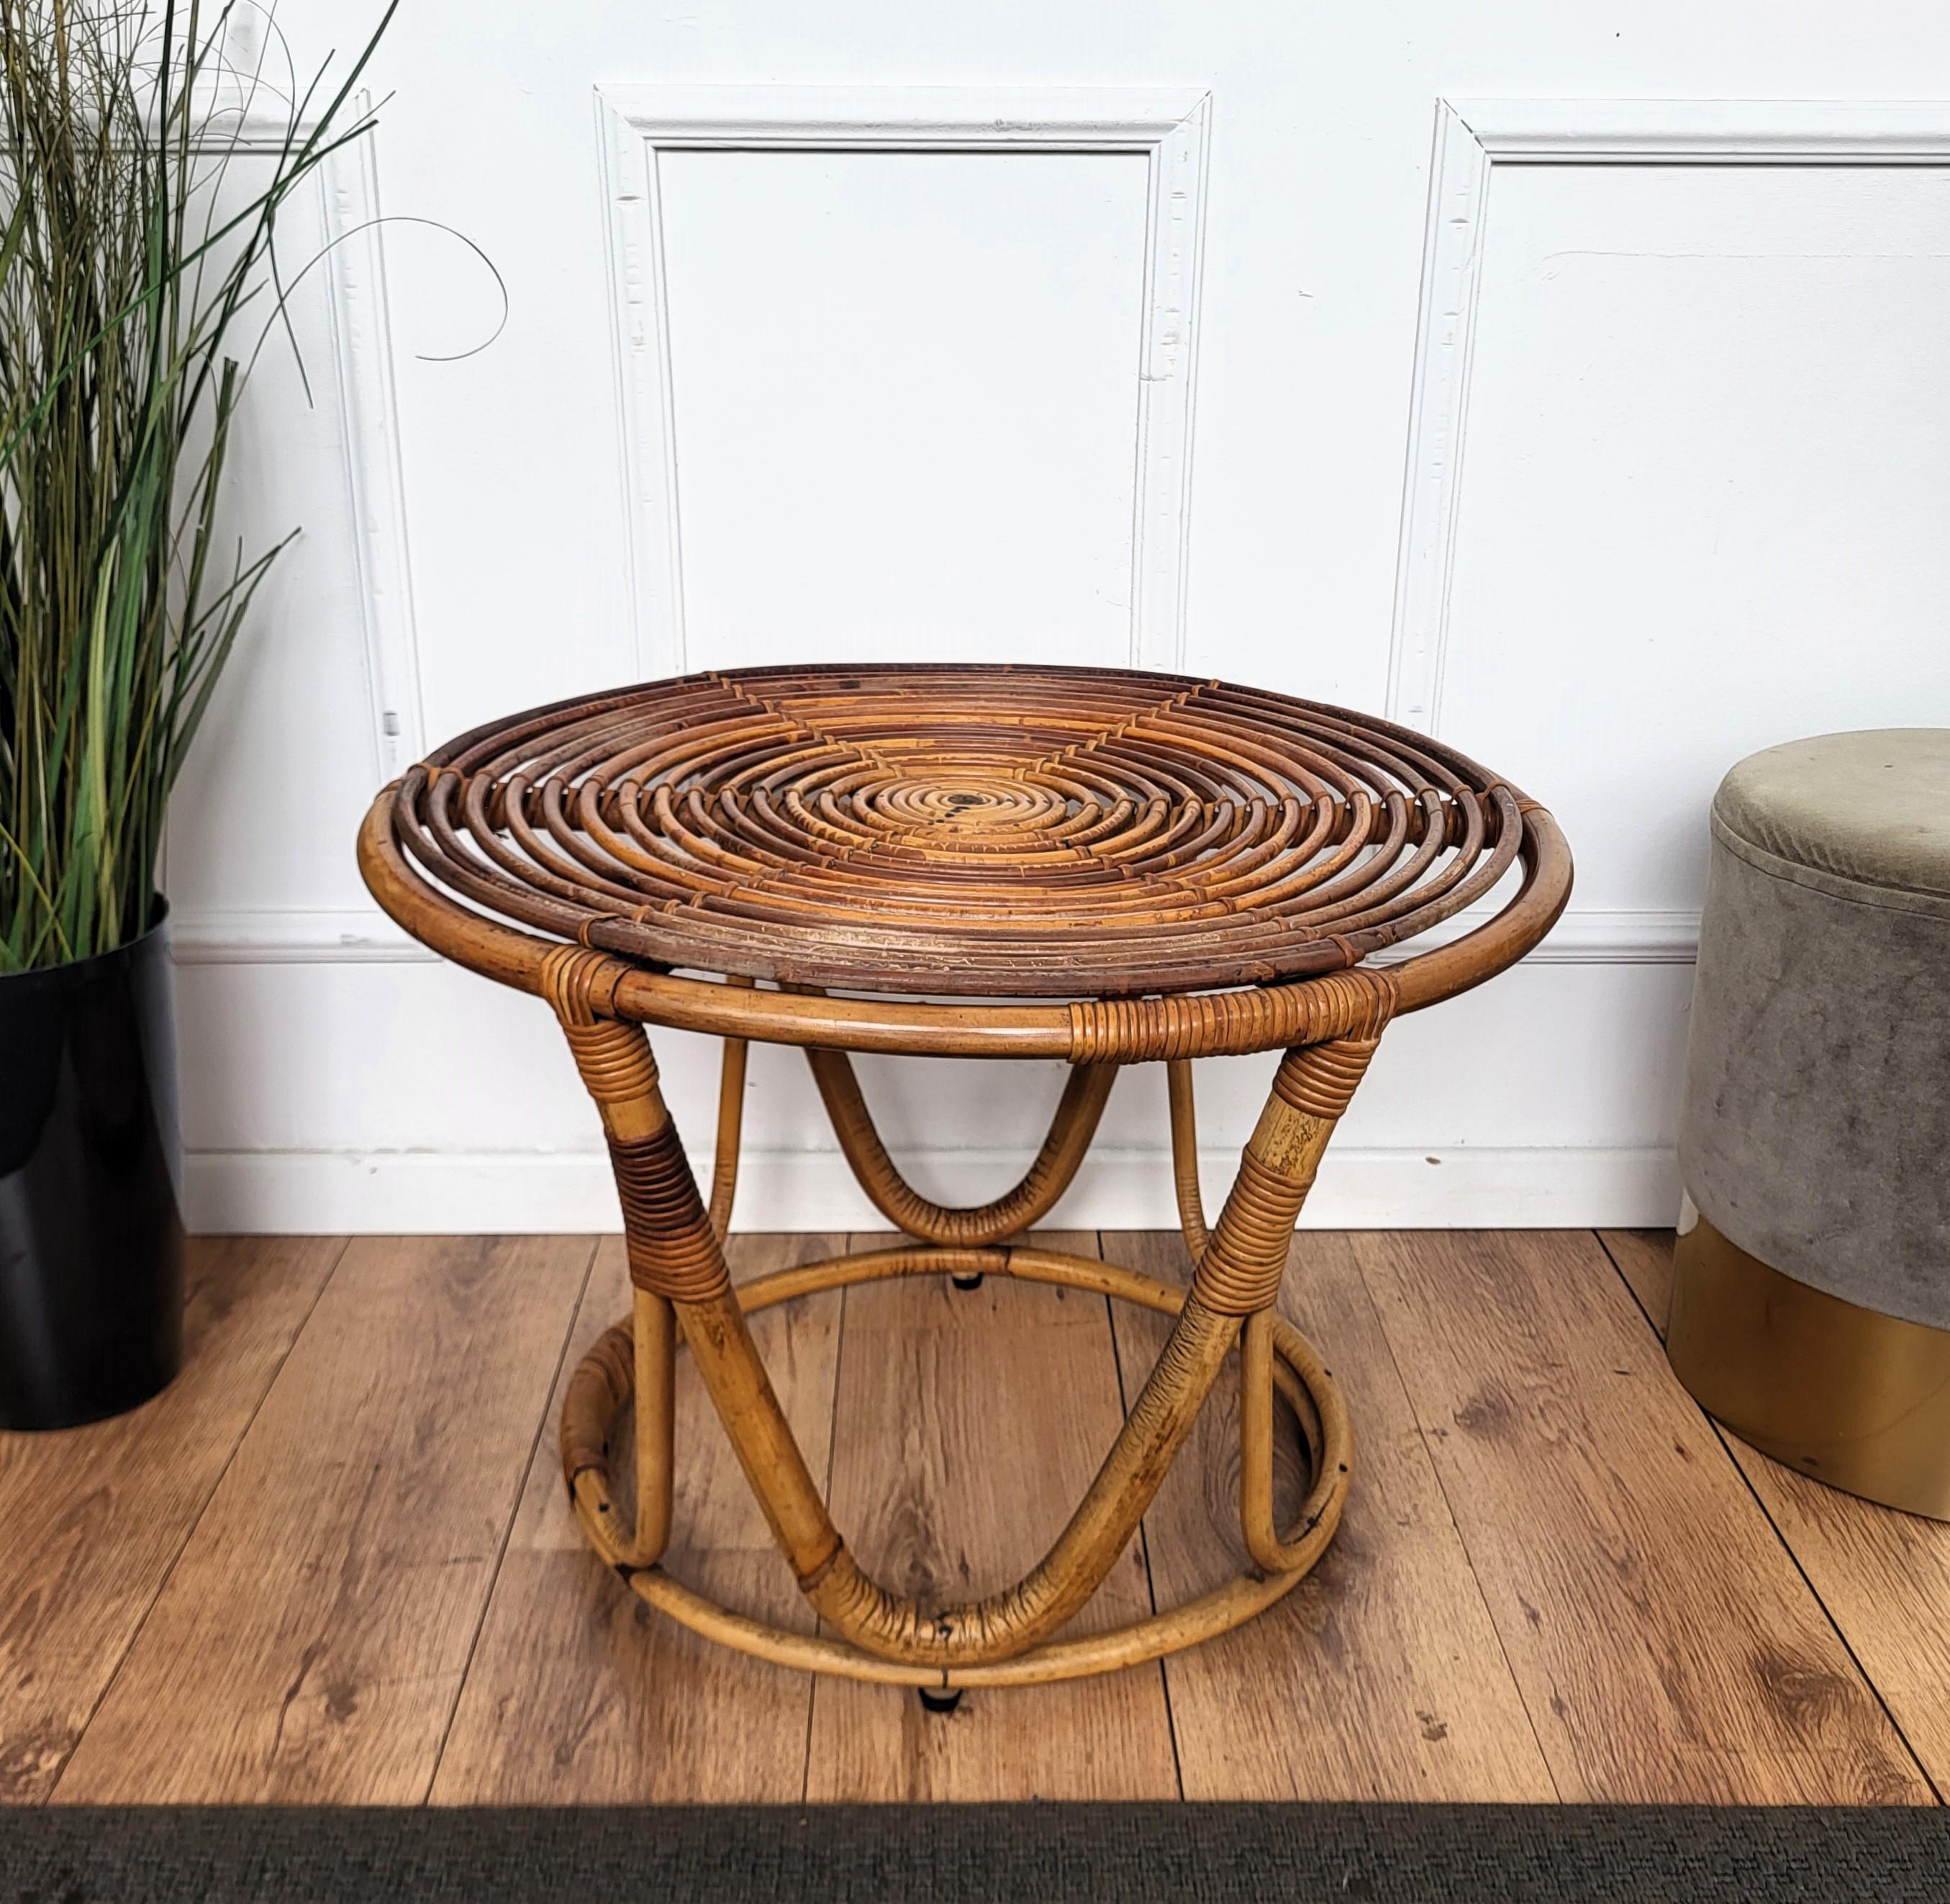 1960s Italian Bamboo Rattan Bohemian French Riviera Round Coffee or Accent Table In Good Condition For Sale In Carimate, Como